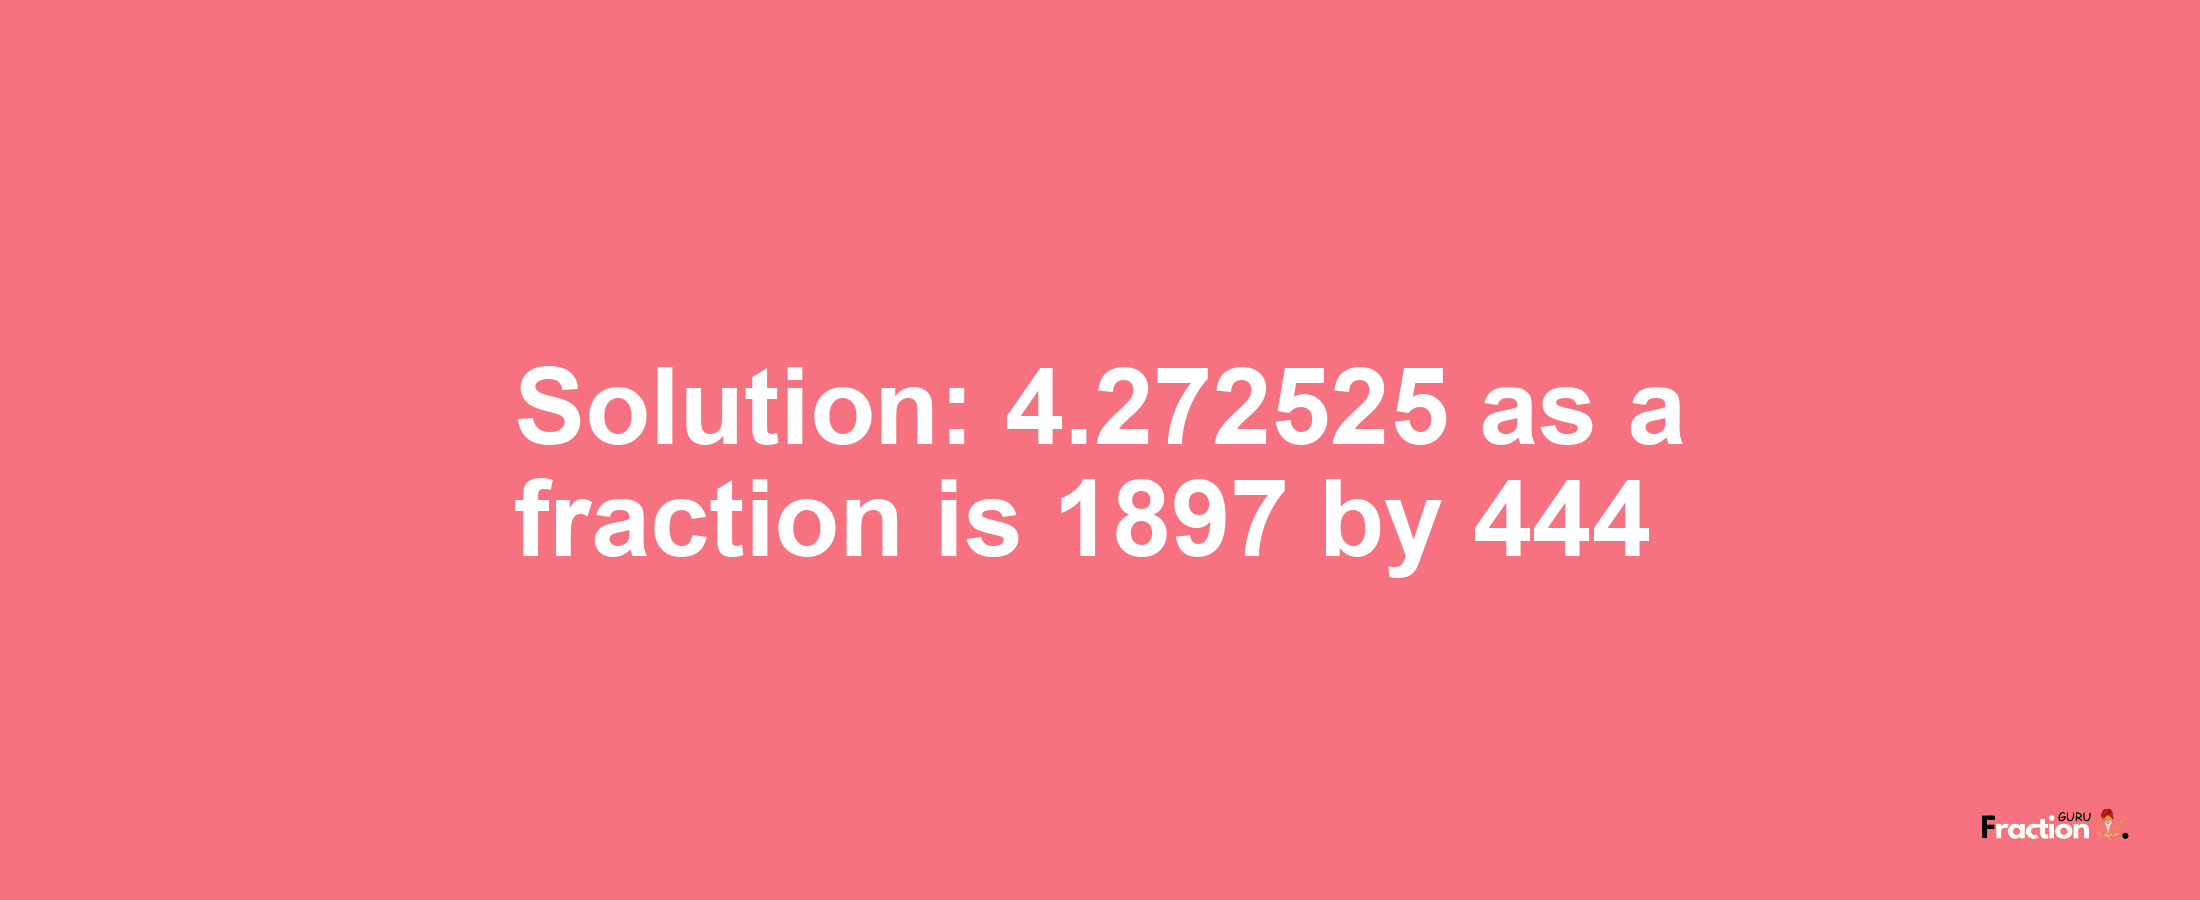 Solution:4.272525 as a fraction is 1897/444